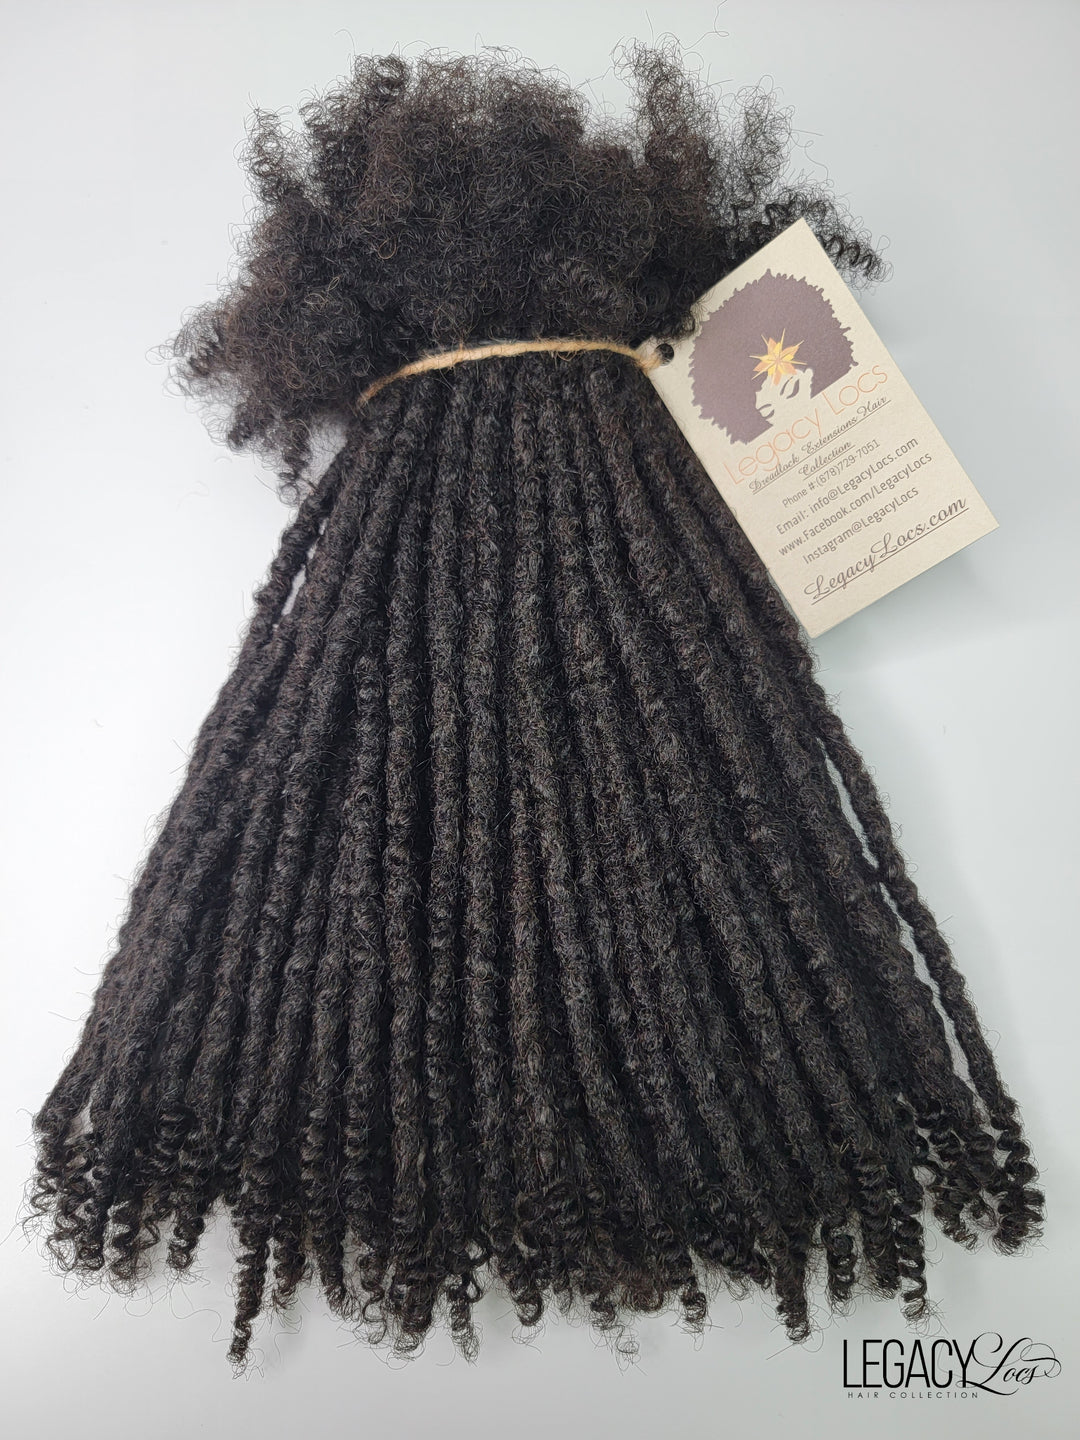 *Textured Coiled Tip* Small Width (10 Locs Per Bundle)